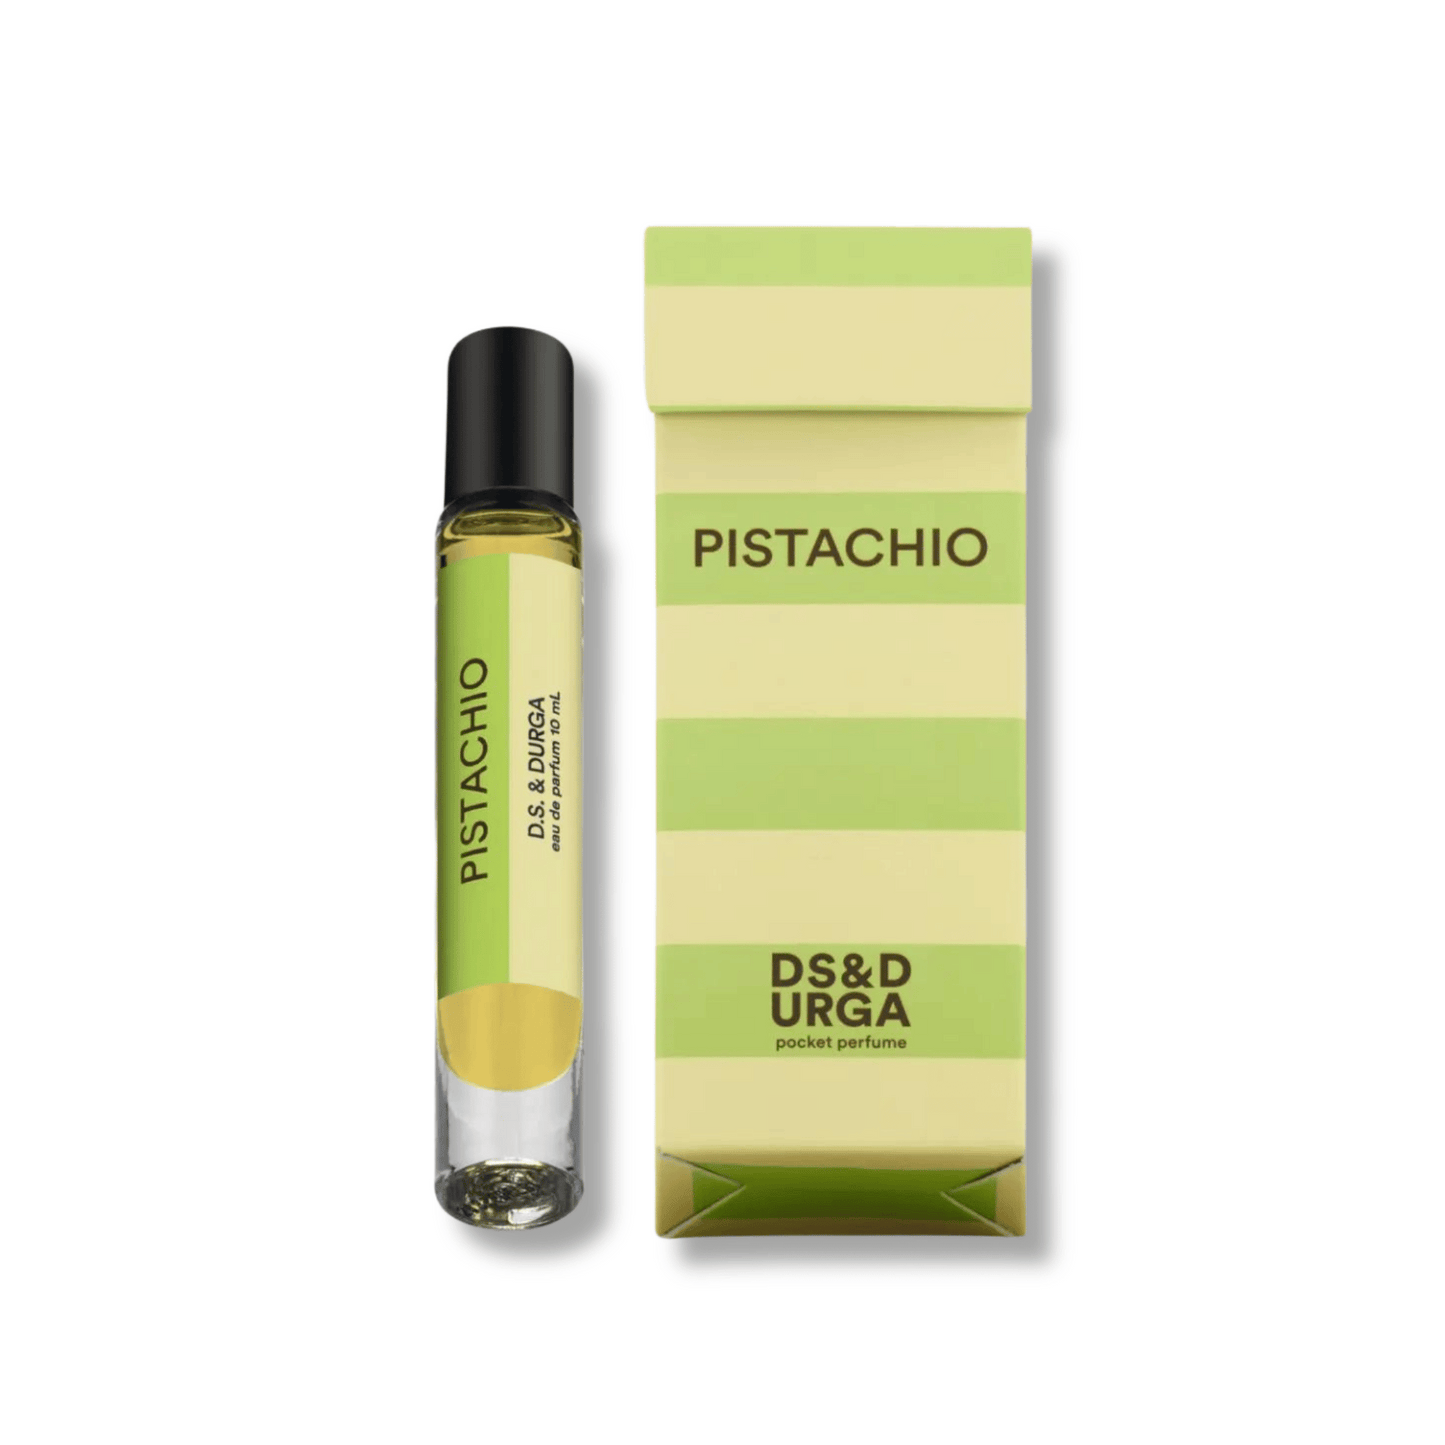 Primary Image of Pocket Perfume - Pistachio Oil Roll-On